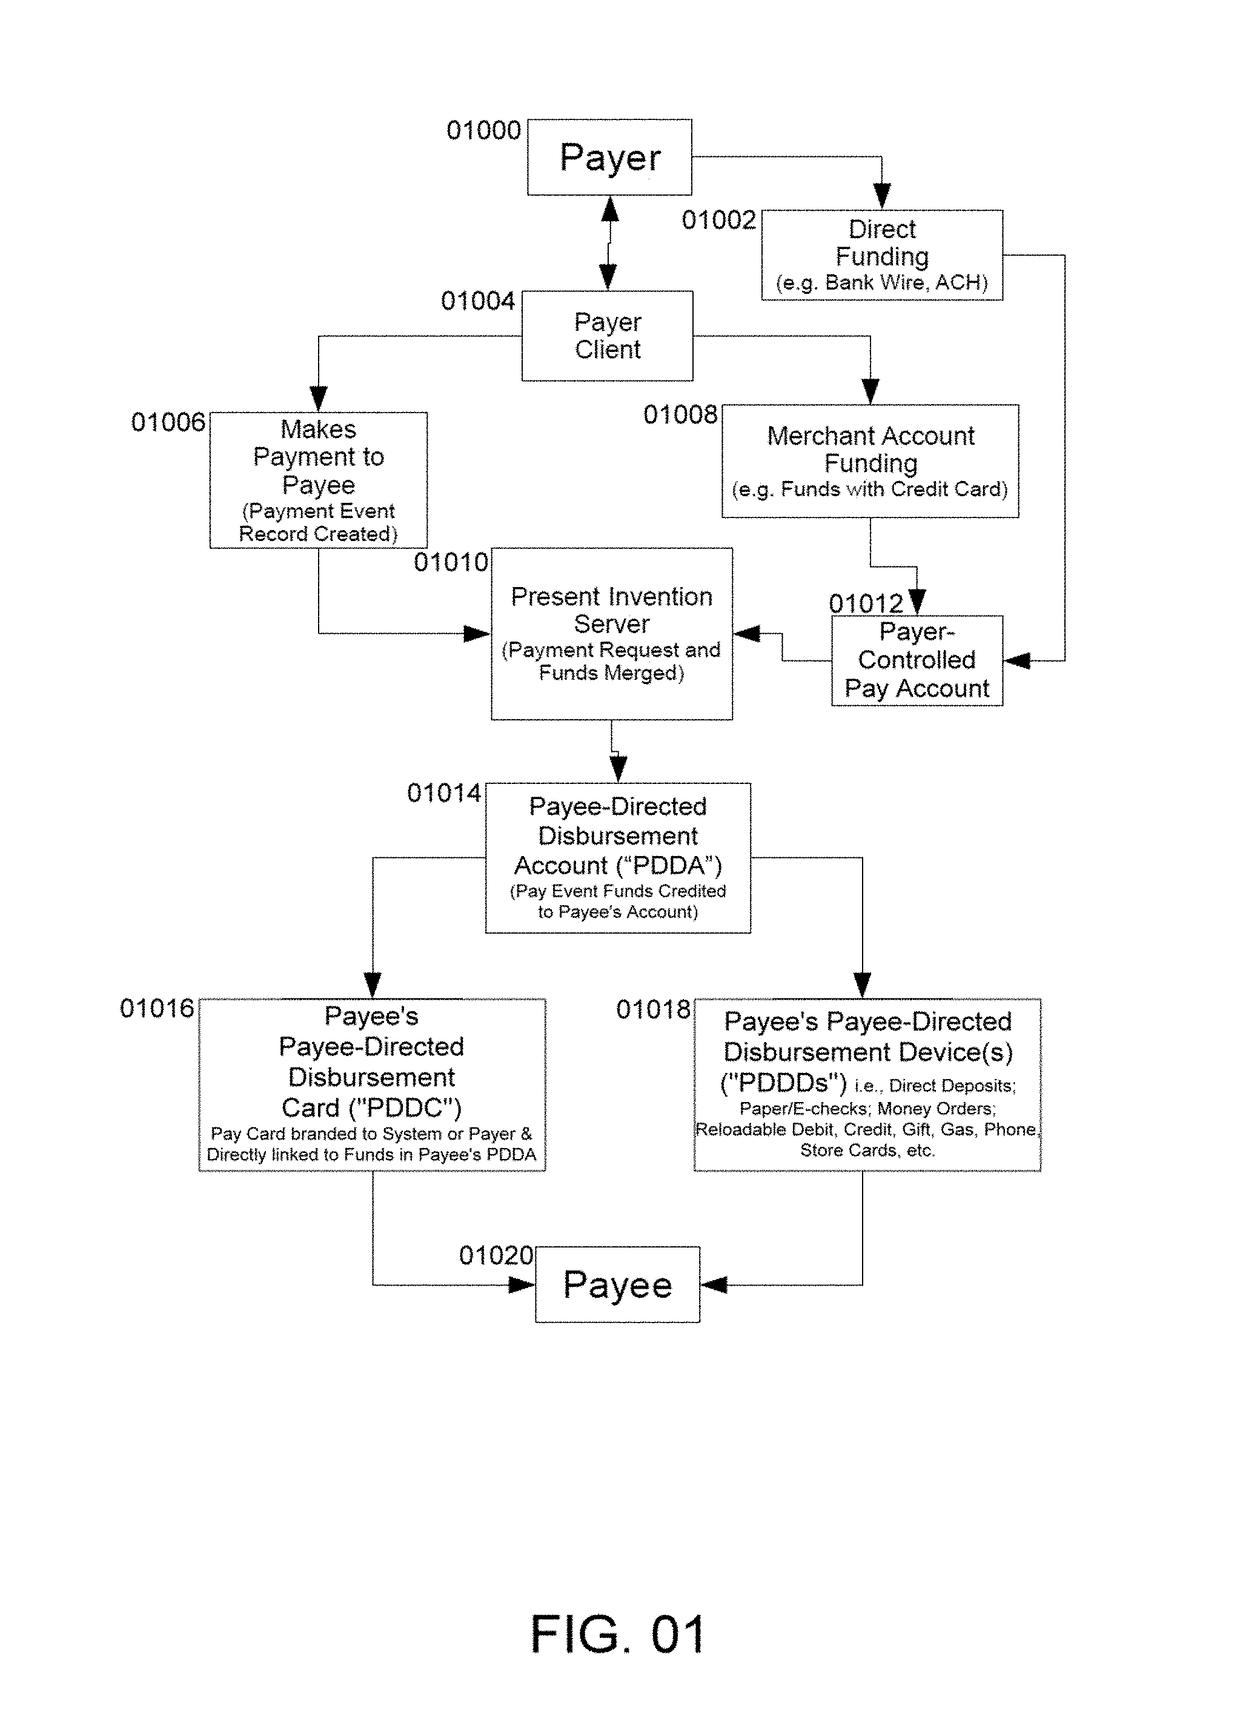 Private Payee-Controlled Compensation Disbursement System to Multiple Payee Directed Disbursement Devices